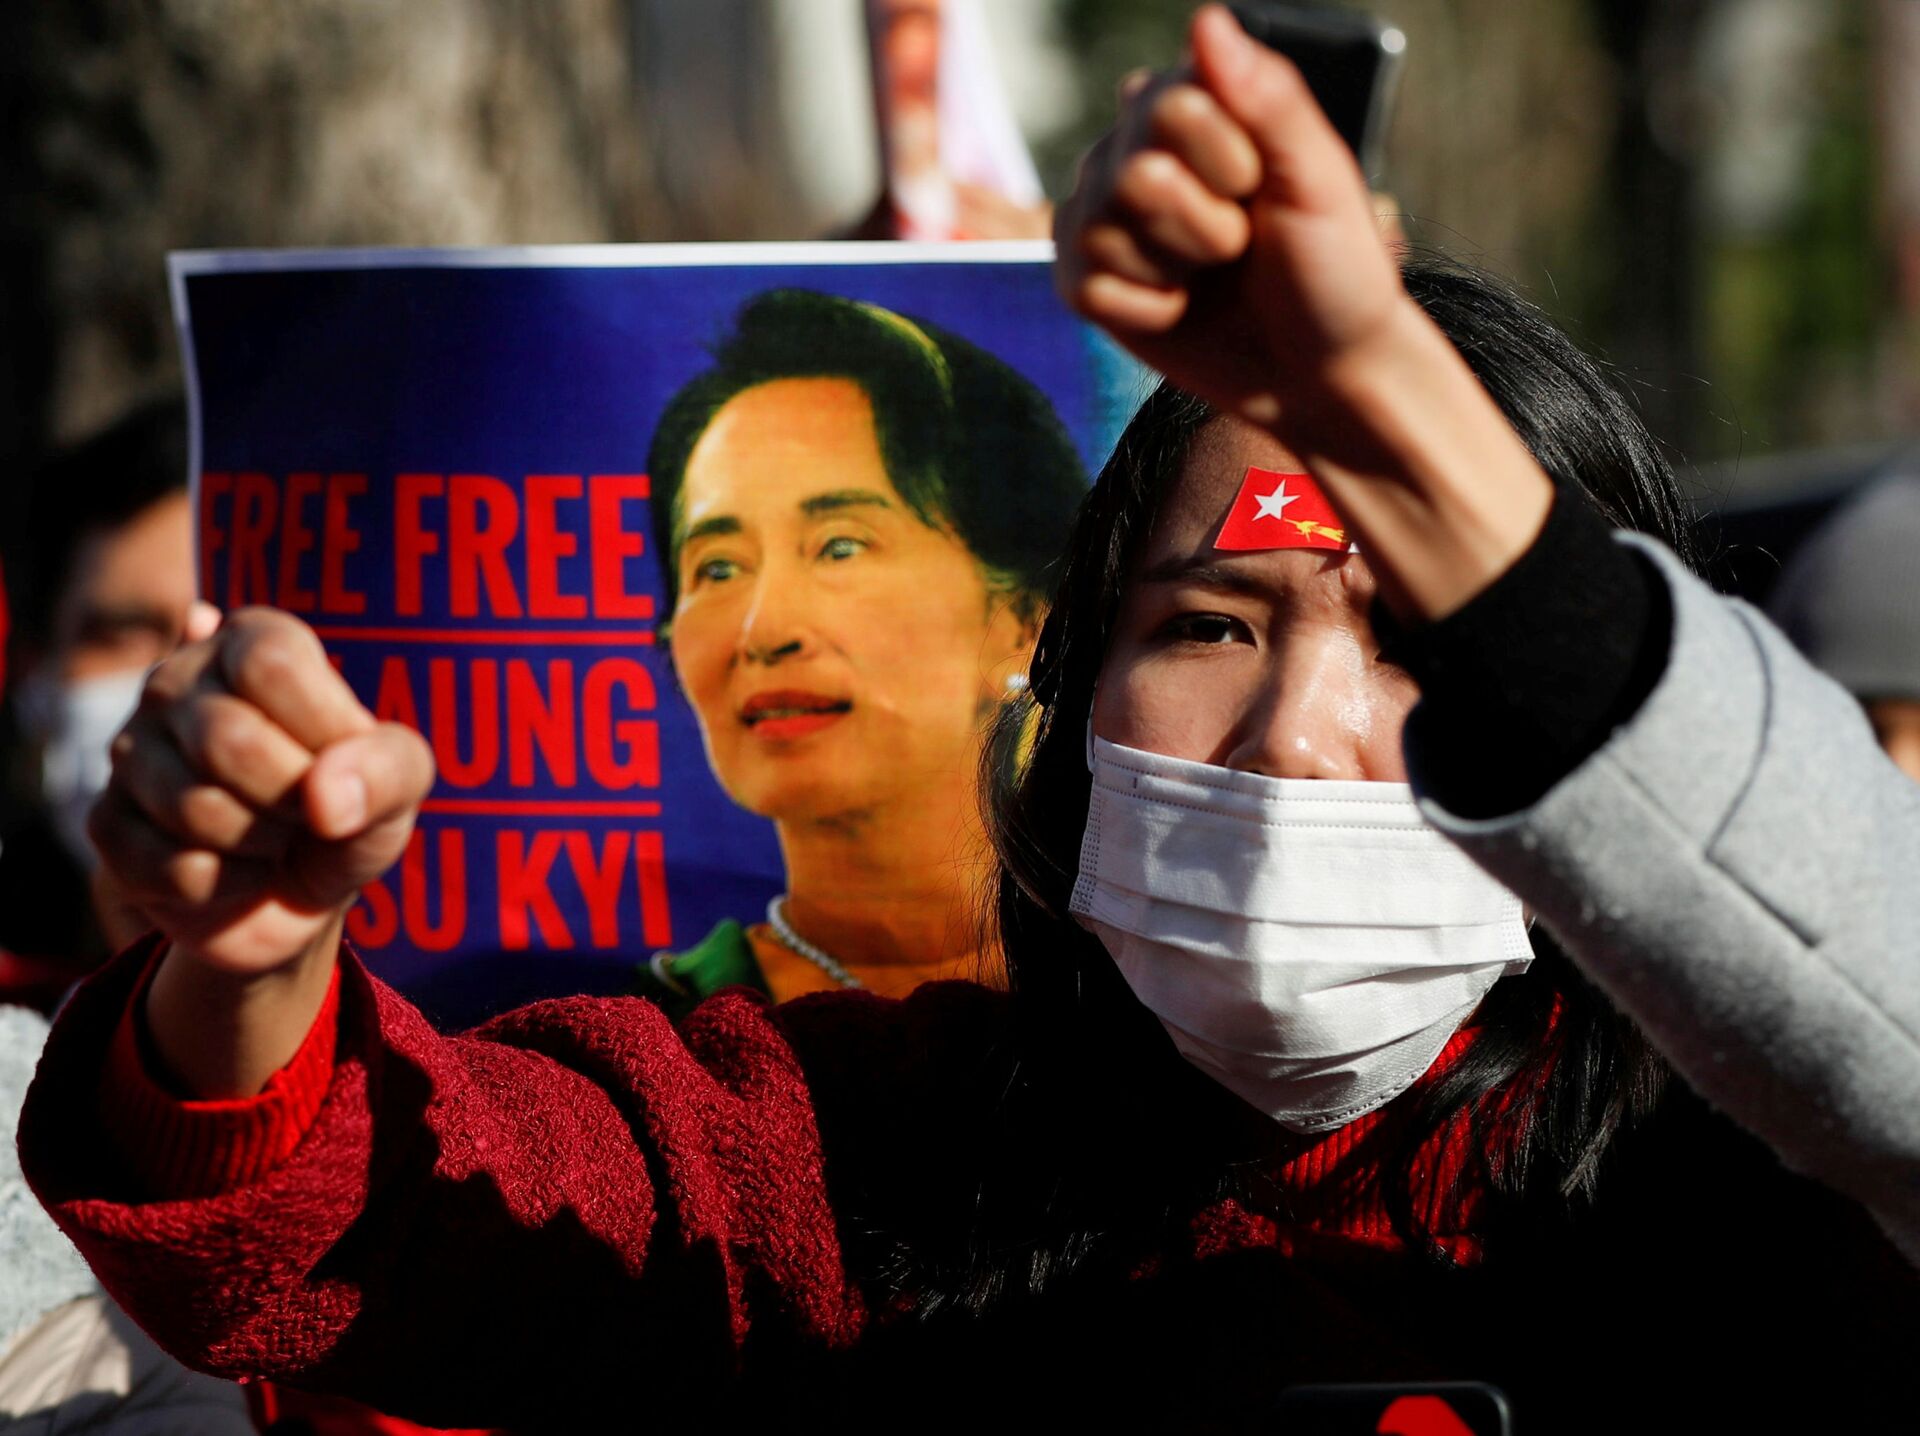 Australian Adviser to Myanmar's Aung San Suu Kyi 'Being Detained' Days After Military Coup - Reports - Sputnik International, 1920, 06.02.2021